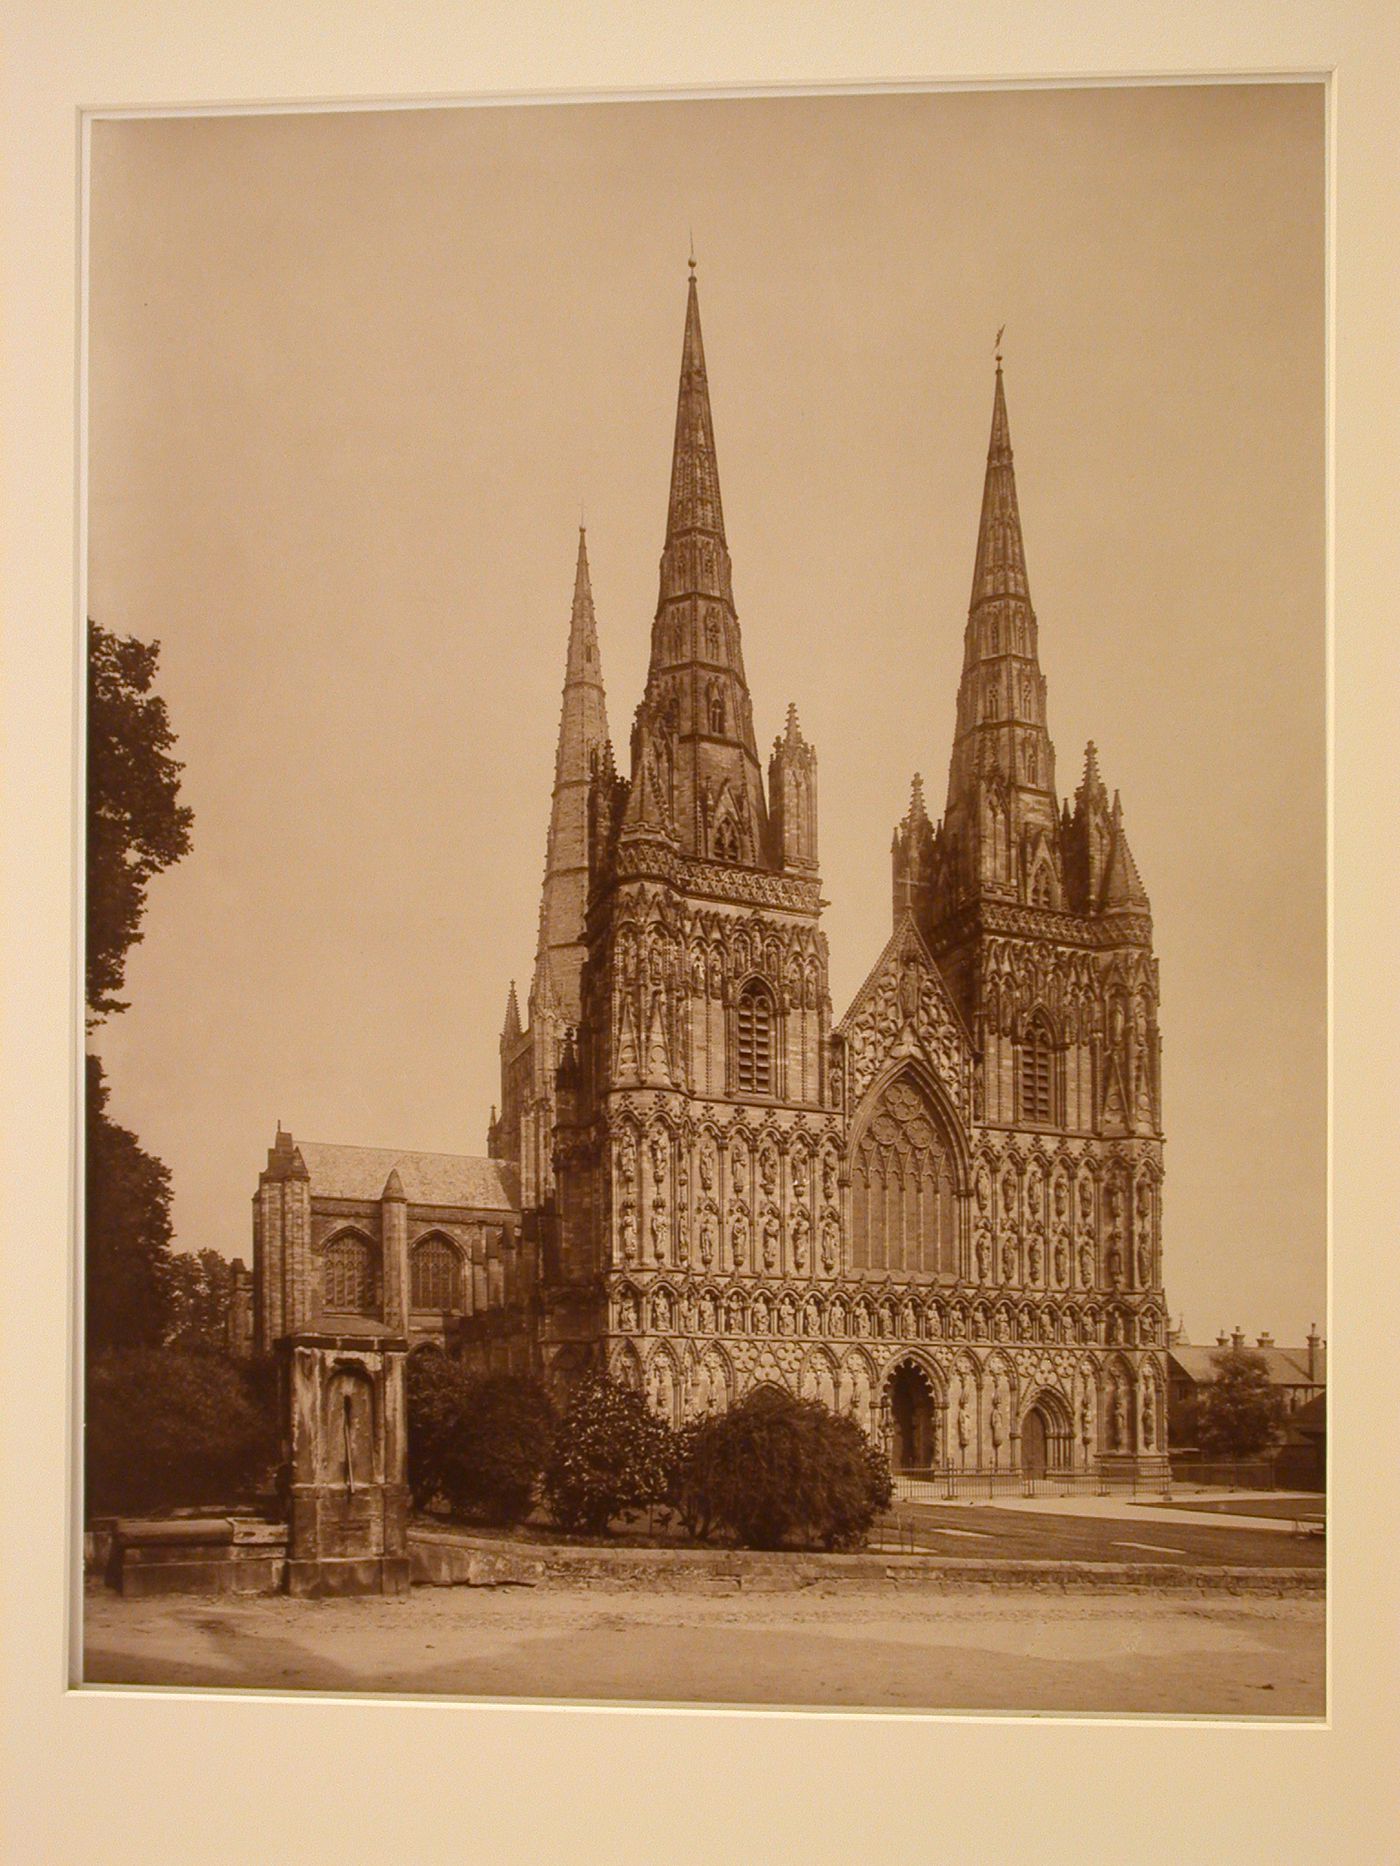 View of façade and towers, Lichfield, England